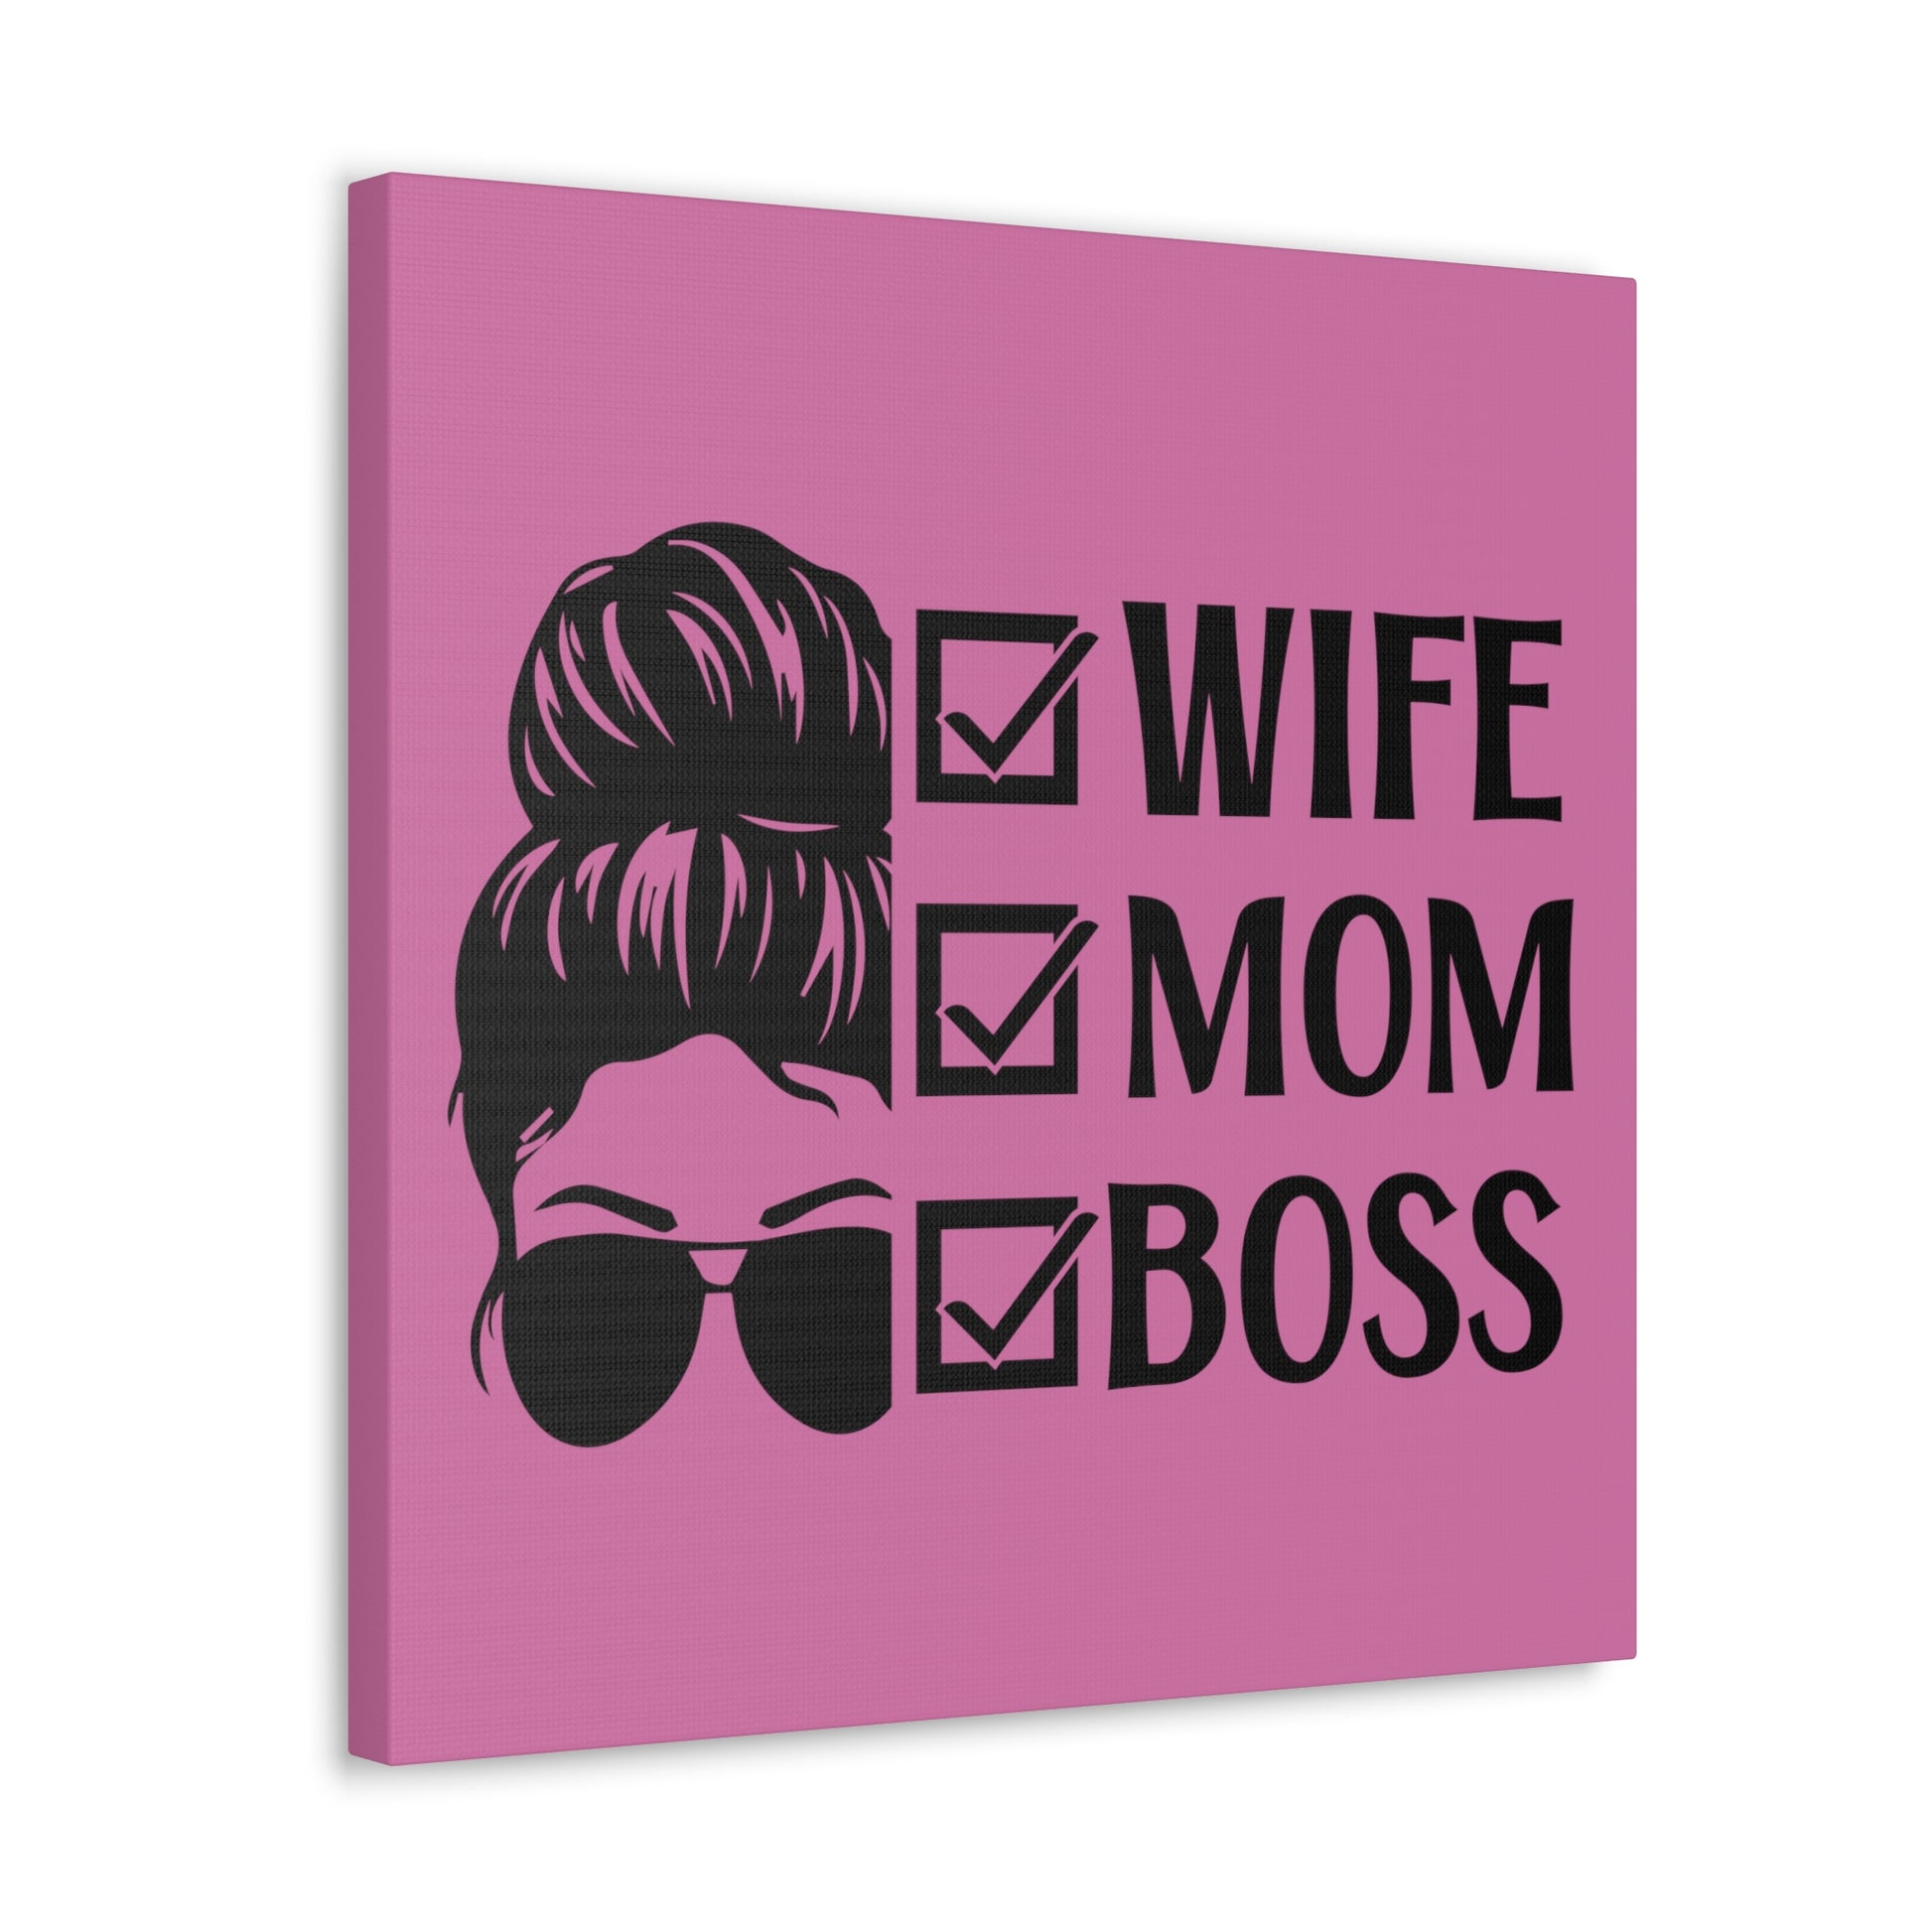 "Wife, Mom, Boss" Wall Art - Weave Got Gifts - Unique Gifts You Won’t Find Anywhere Else!